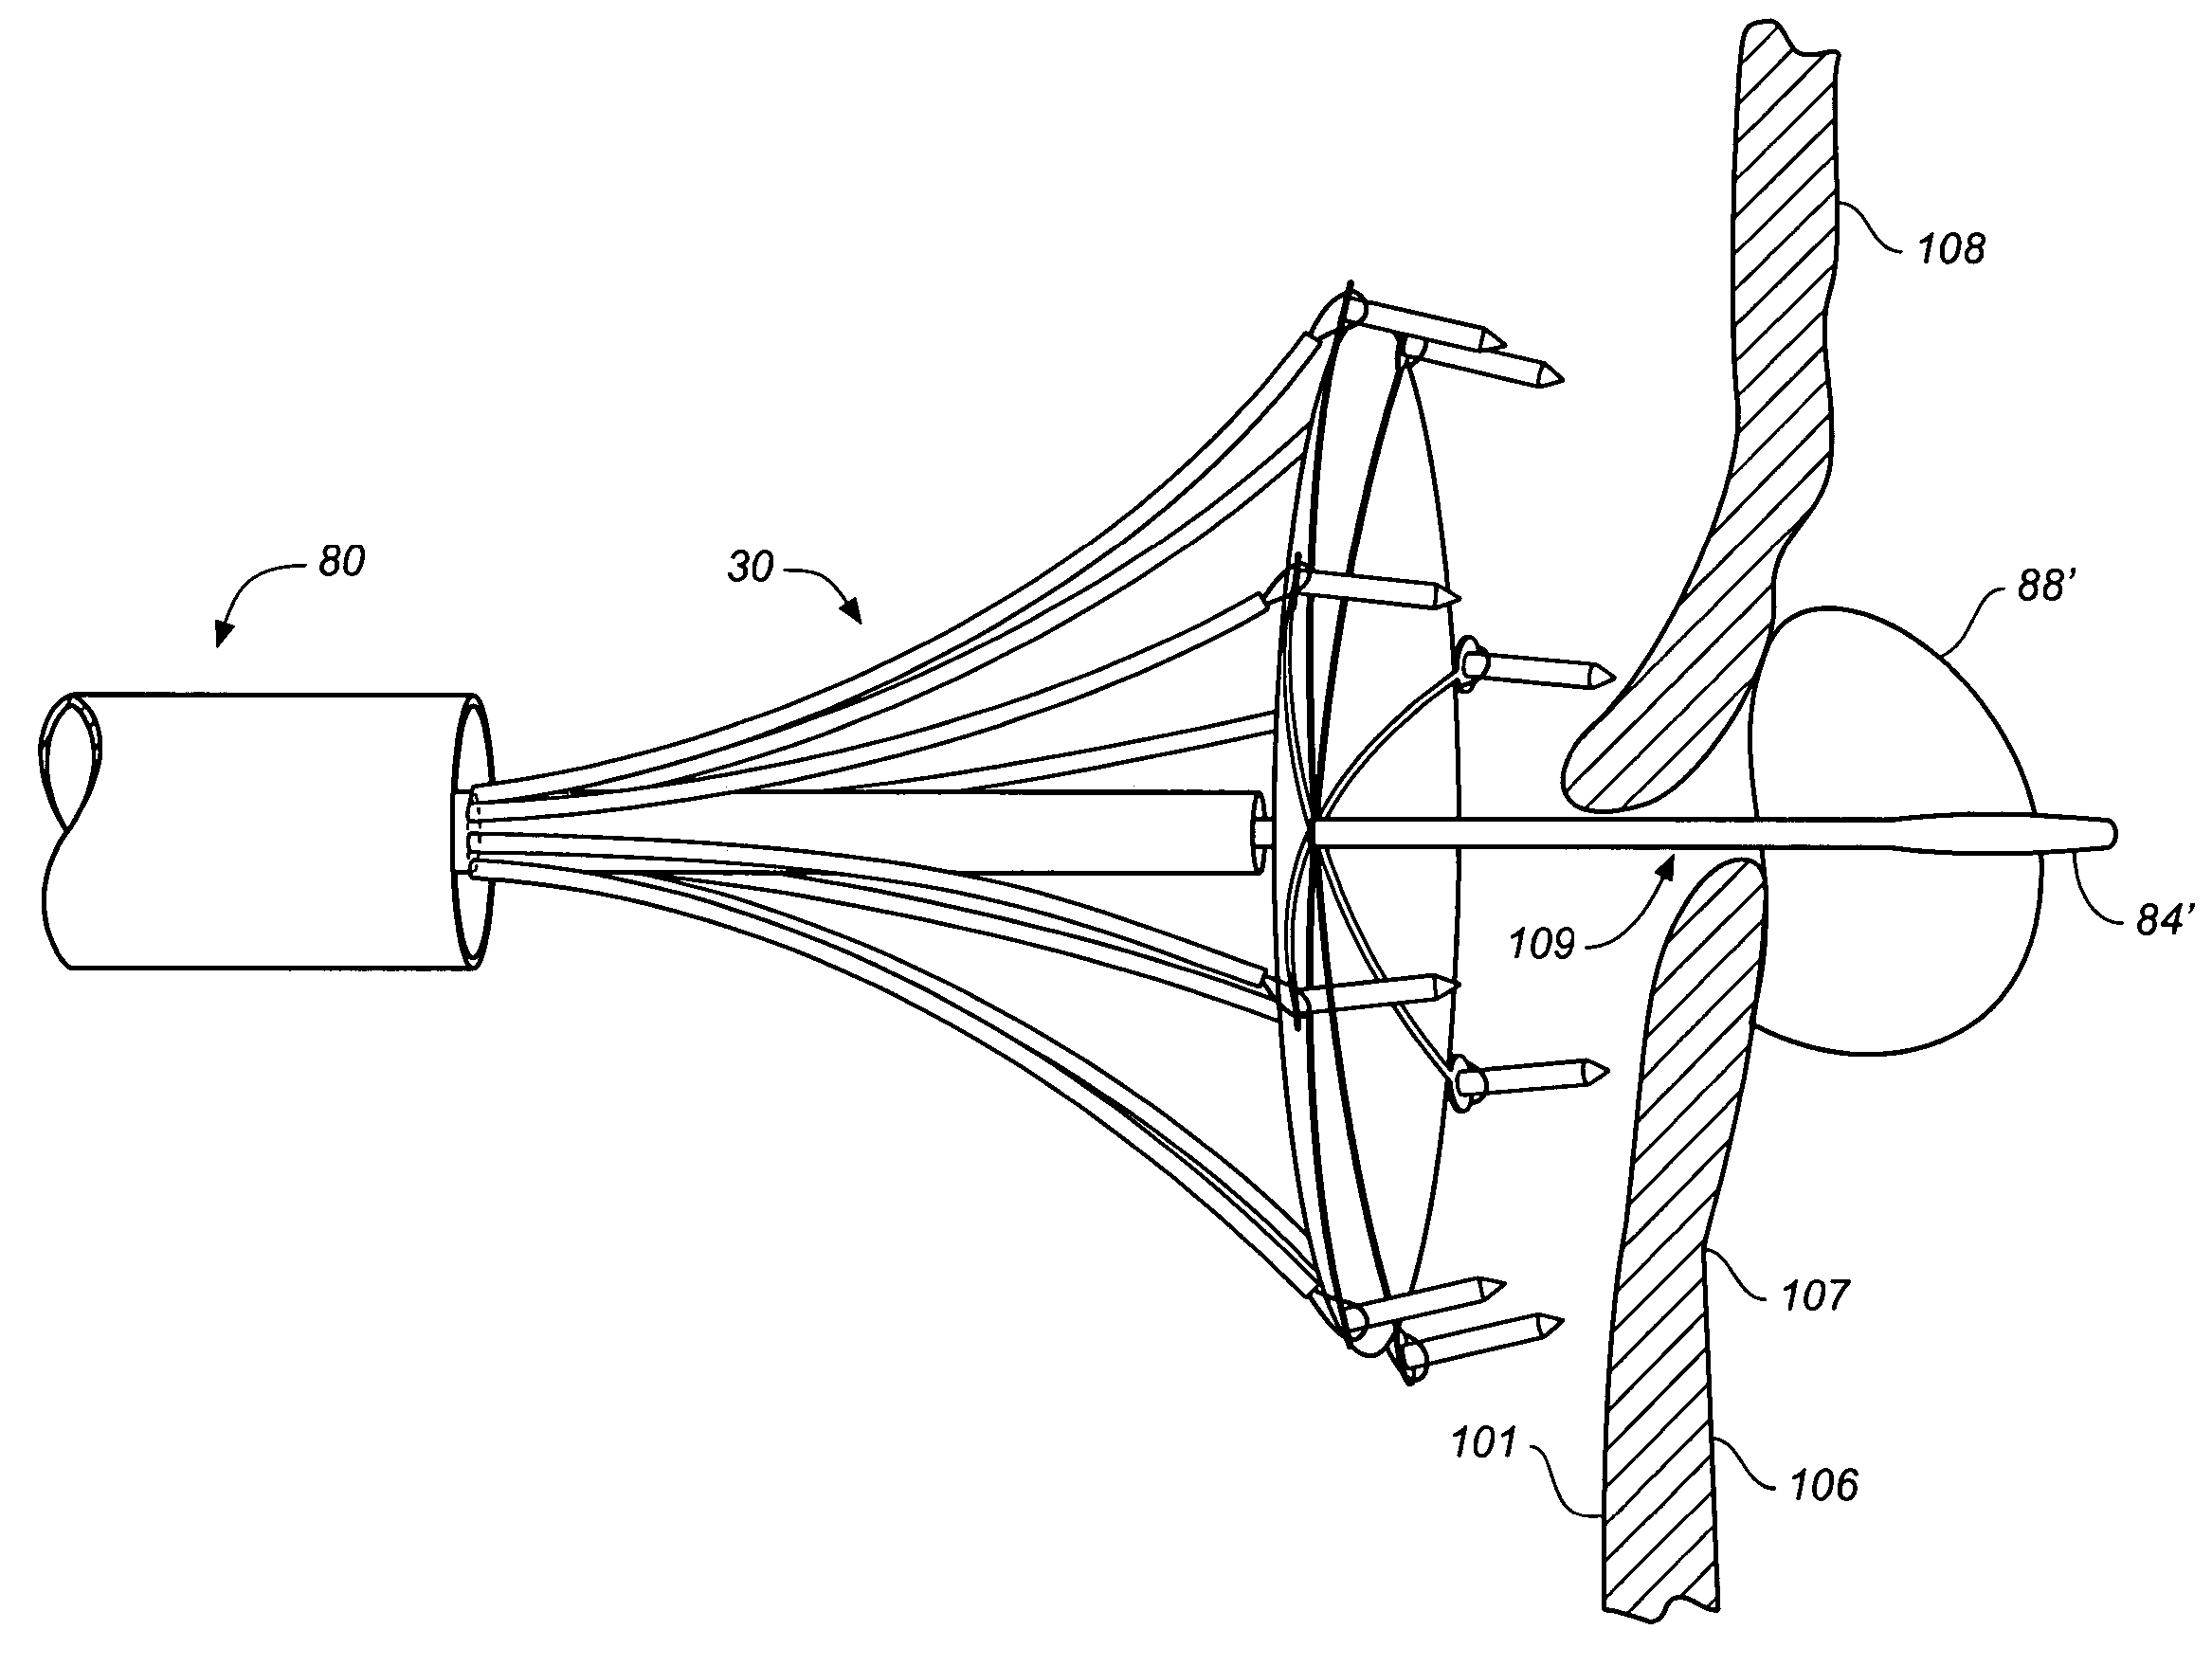 Cardiovascular defect patch device and method